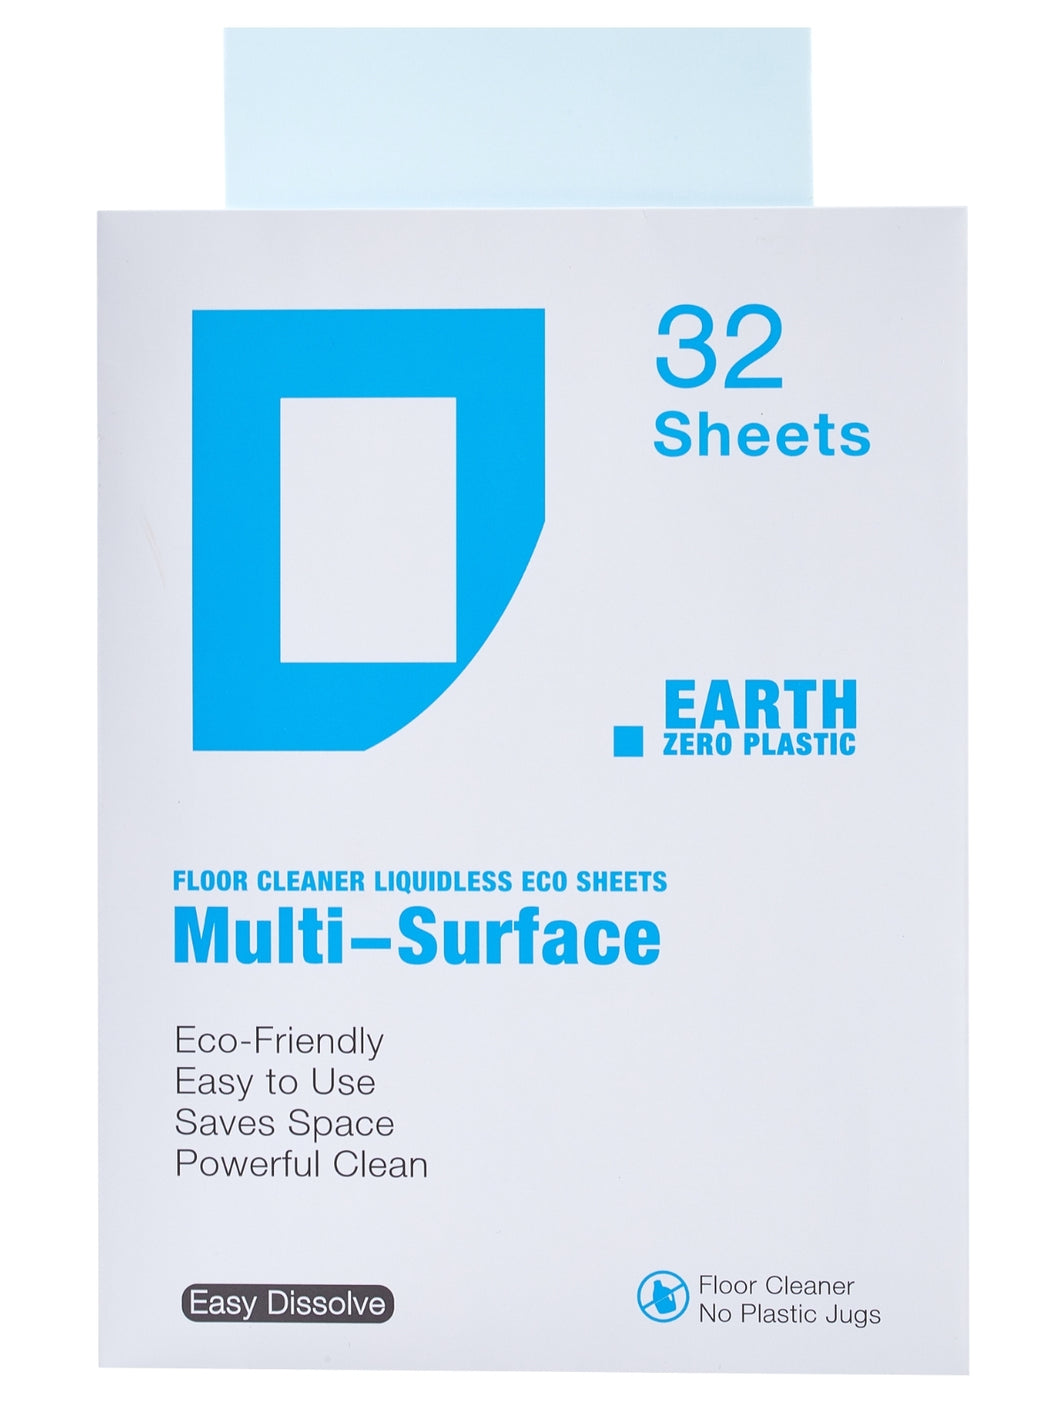 Floor Cleaner Liquidless Sheets-Multi-Surface